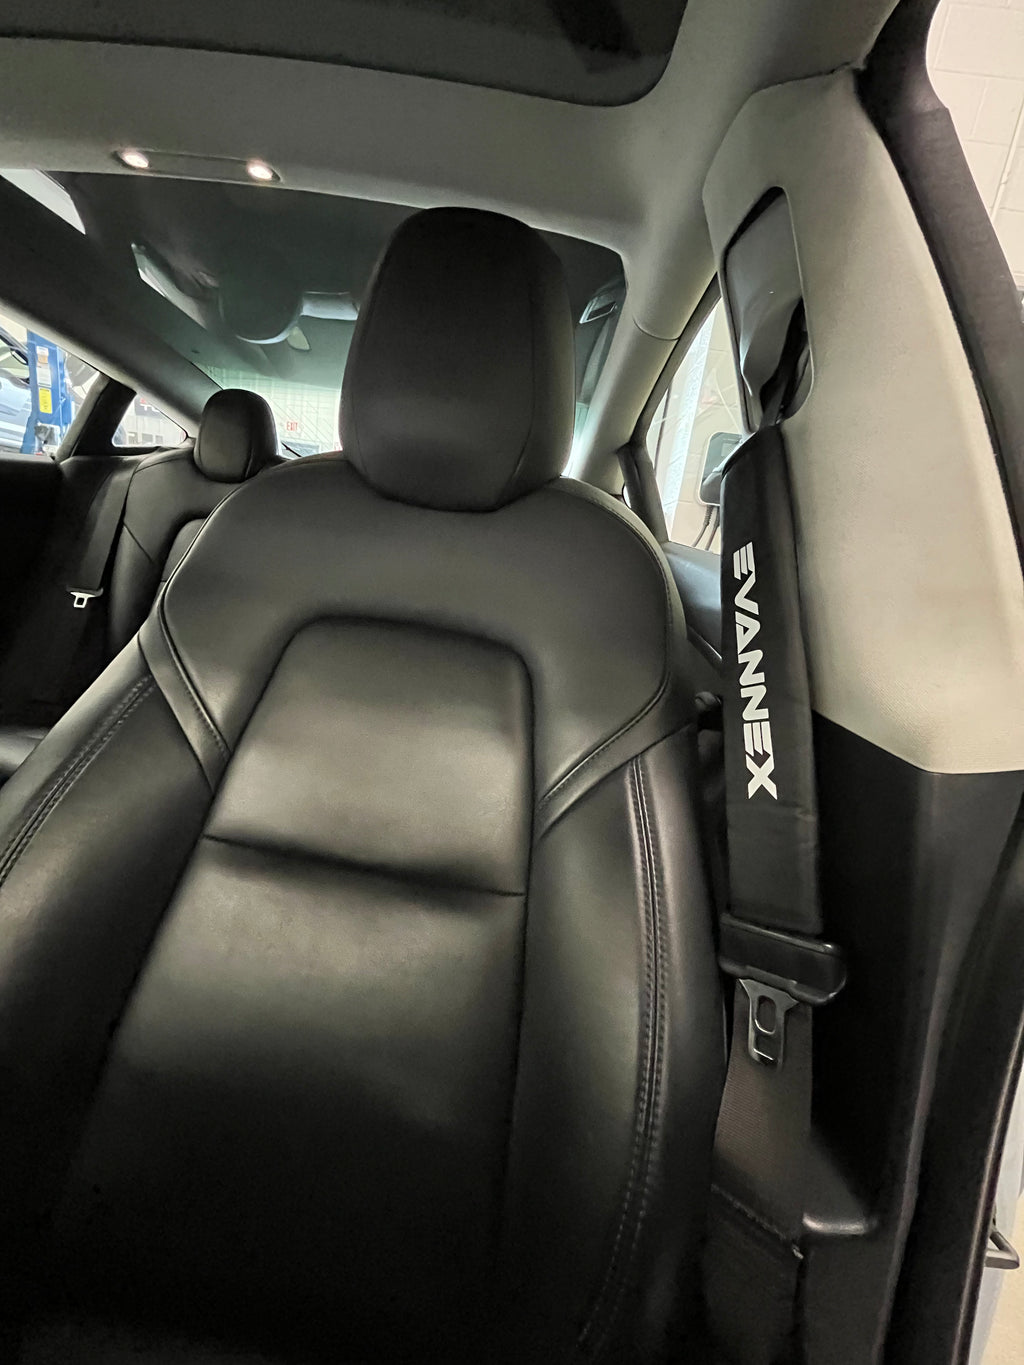 EVANNEX Seat Belt Cover for EV Owners